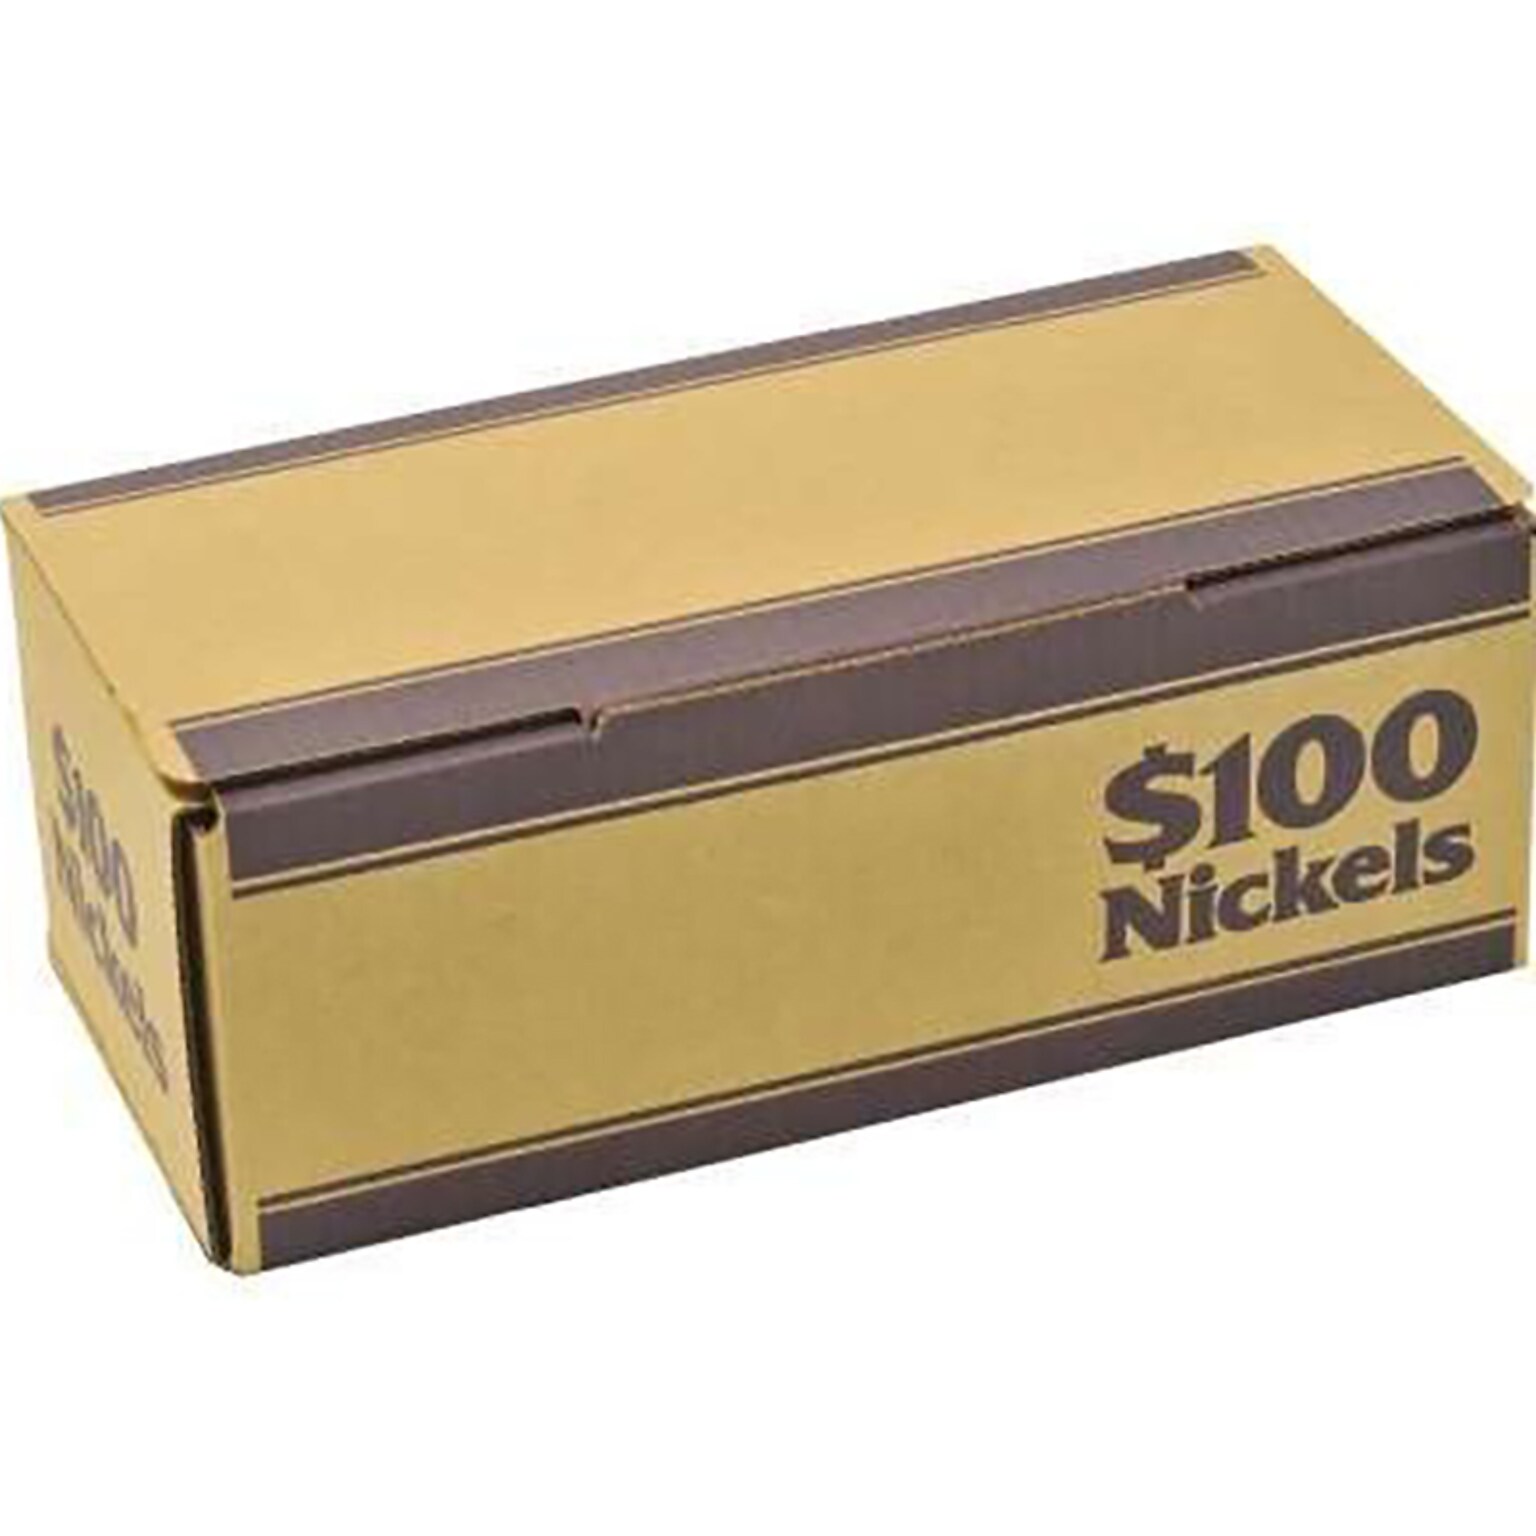 CONTROLTEK $100 of Nickels Coin Box, 1-Compartment, Kraft/Blue, 50/Pack (560060)